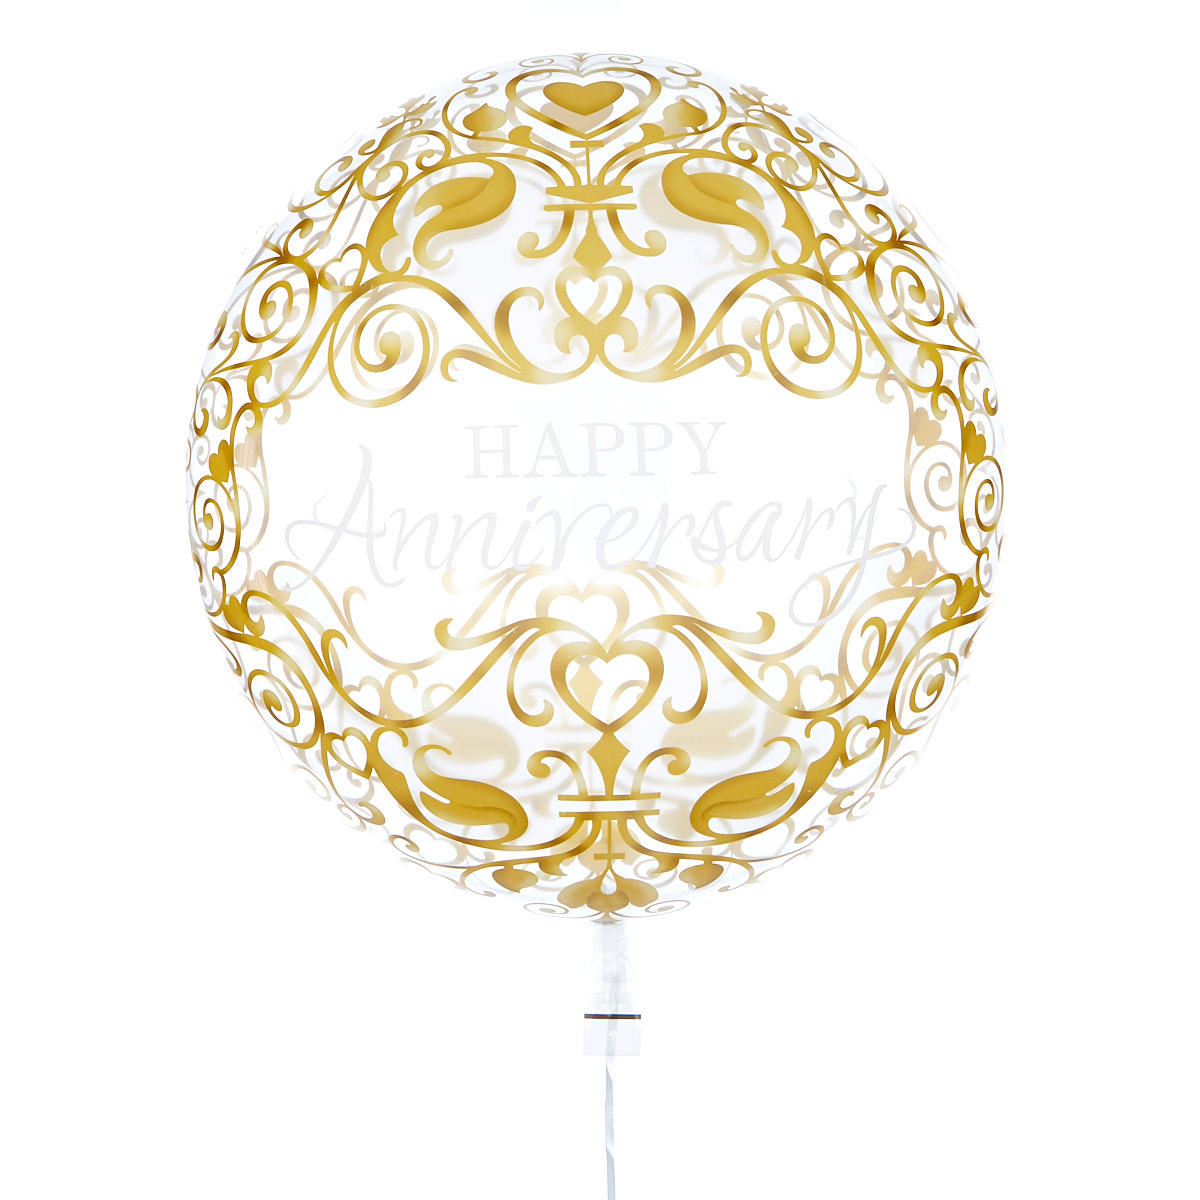 22-Inch Bubble Balloon - Happy Anniversary - DELIVERED INFLATED!